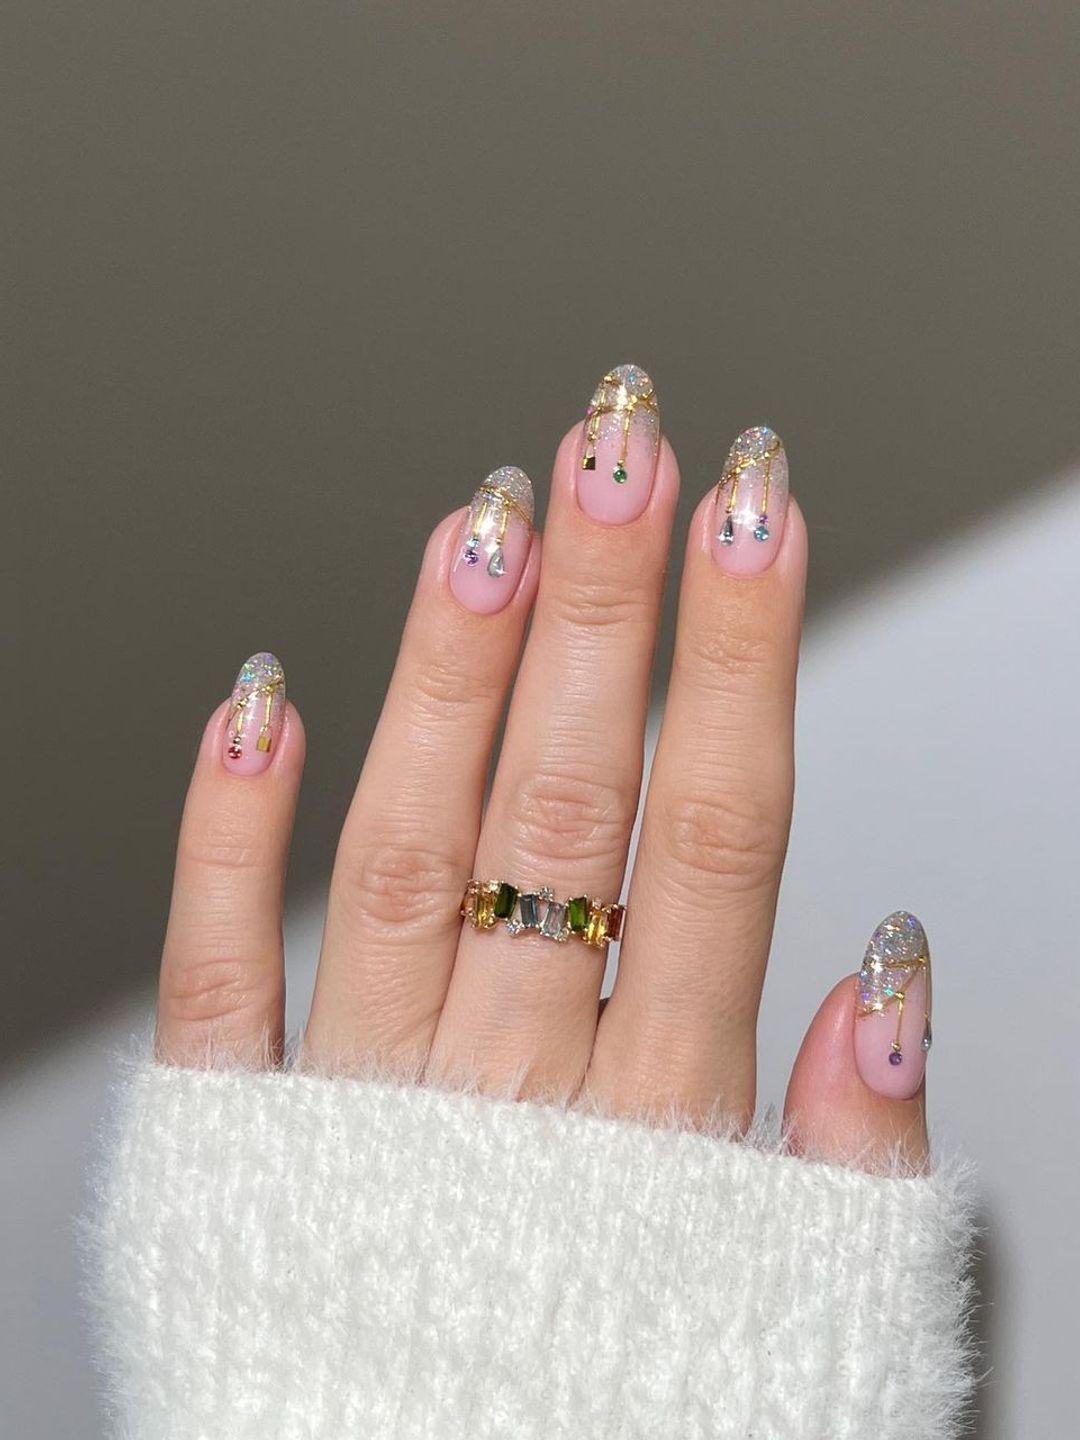 Creative Nail Concepts for Your Next Manicure : Gemstones + Ombre Pink Nails